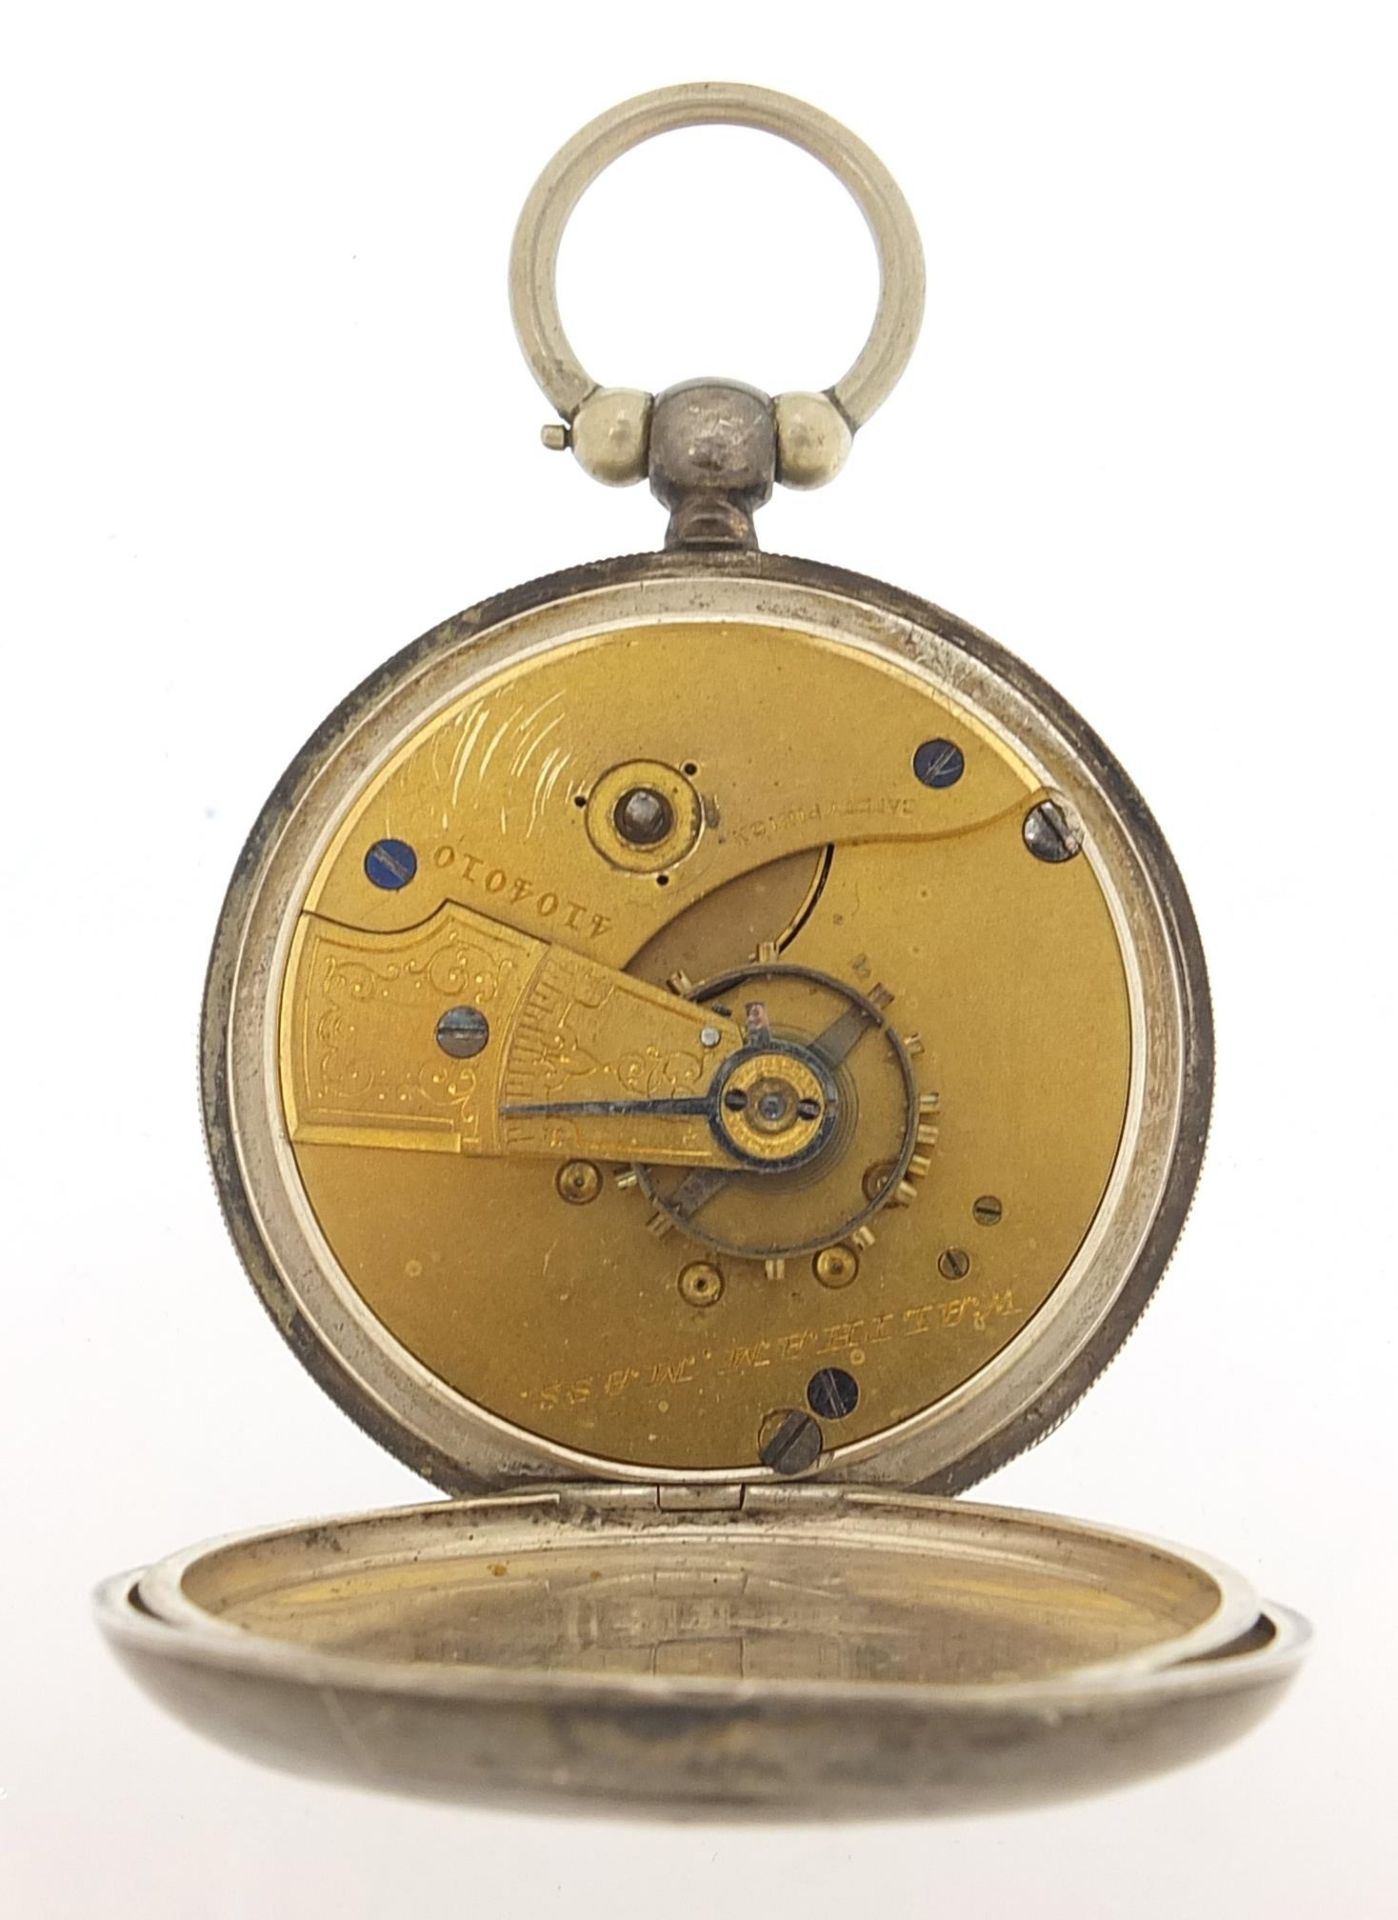 Waltham, gentlemen's silver open face pocket watch with enamelled dial, the movement numbered - Image 3 of 4